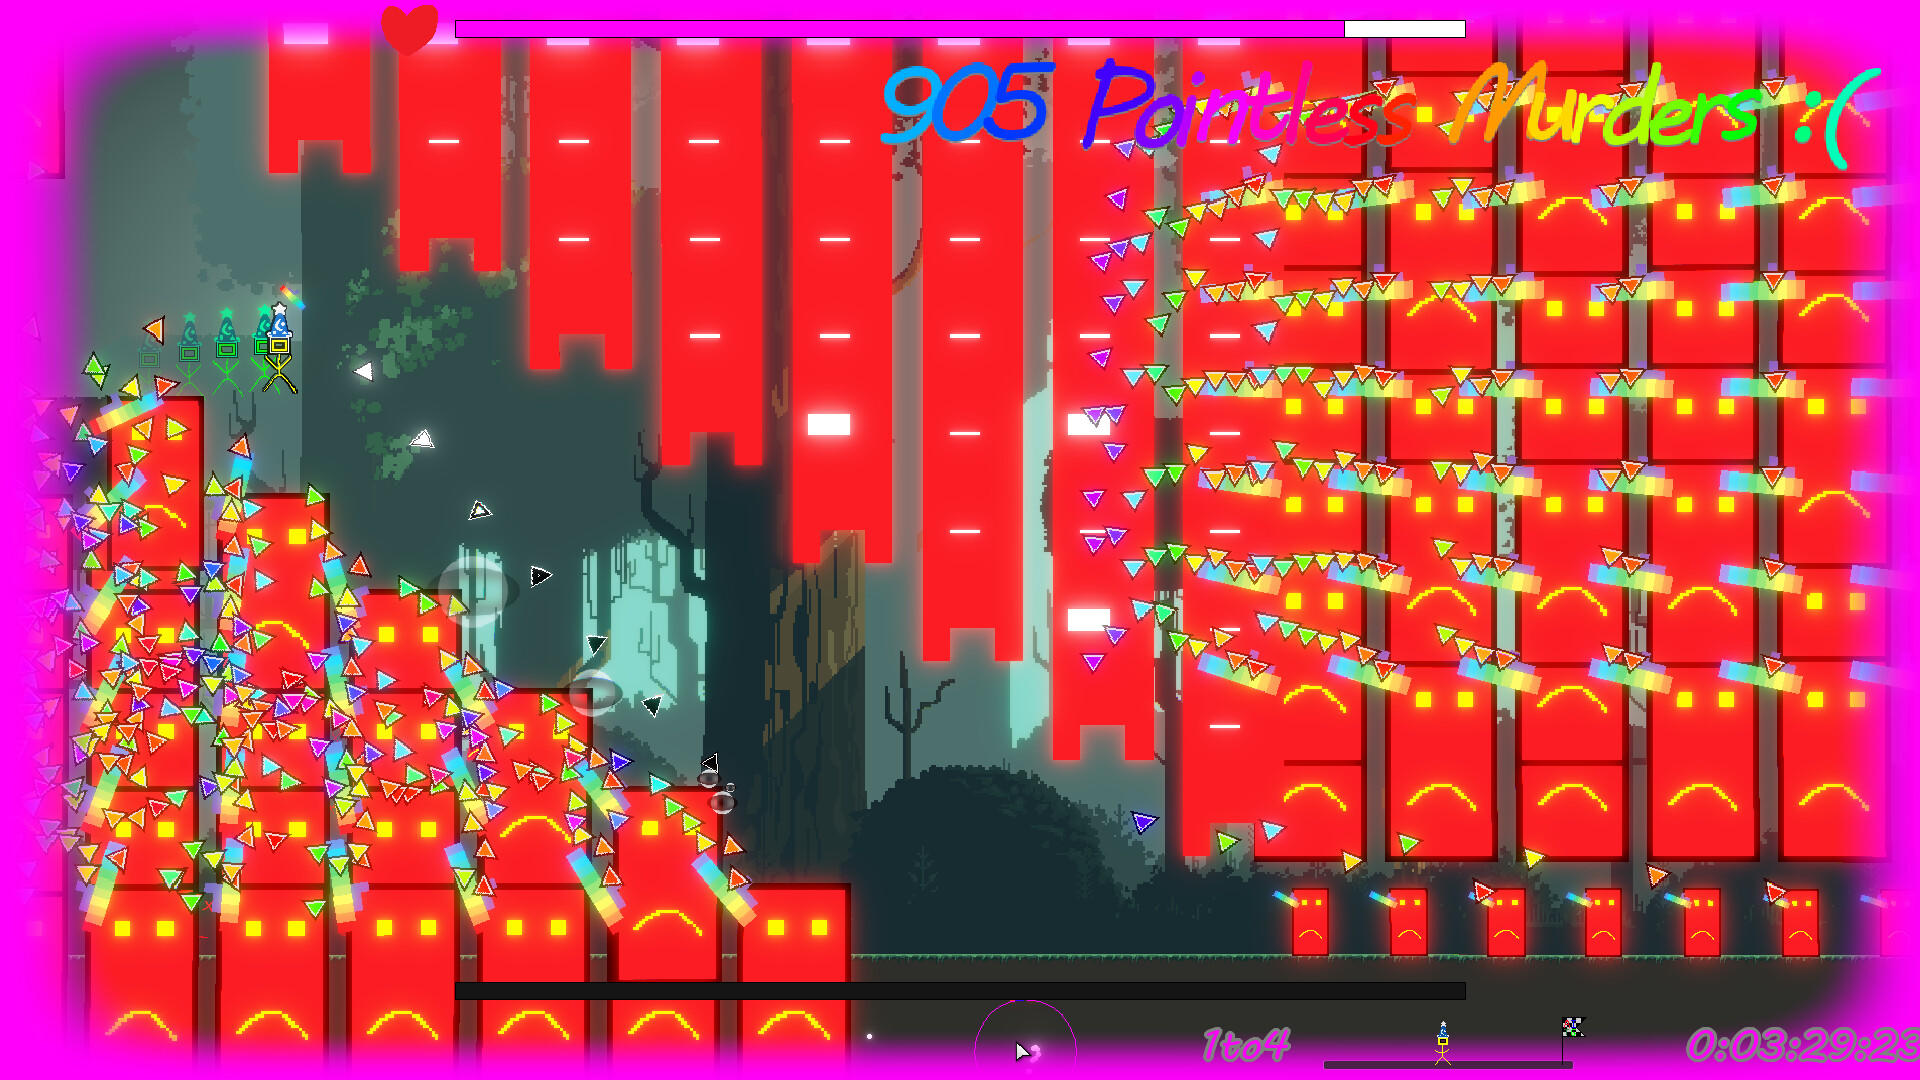 A2C:Ayry seems to be playtesting a 2D runner shooter from Cci screenshot game